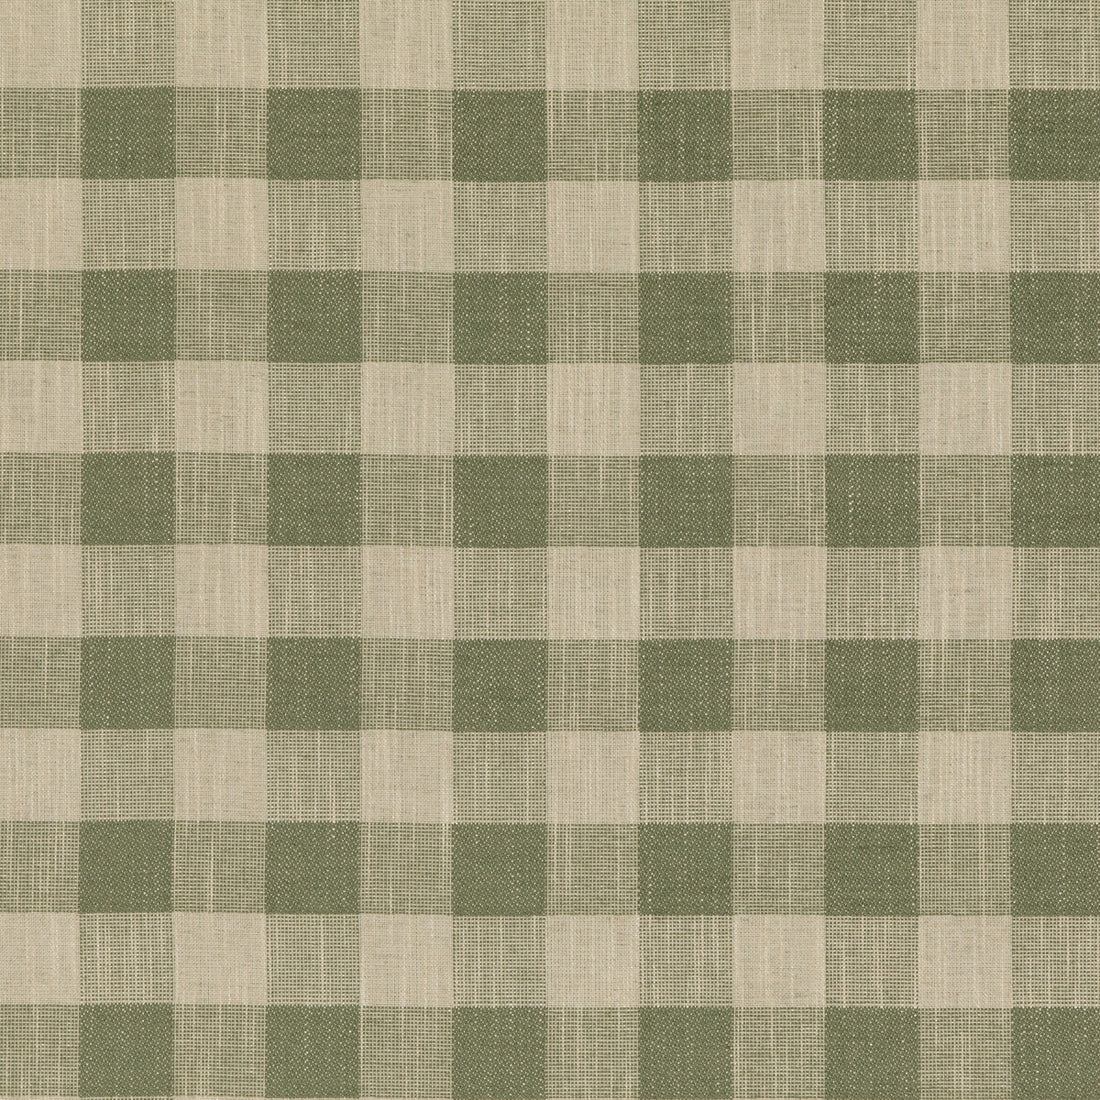 Block Check fabric in green color - pattern PF50490.735.0 - by Baker Lifestyle in the Block Weaves collection